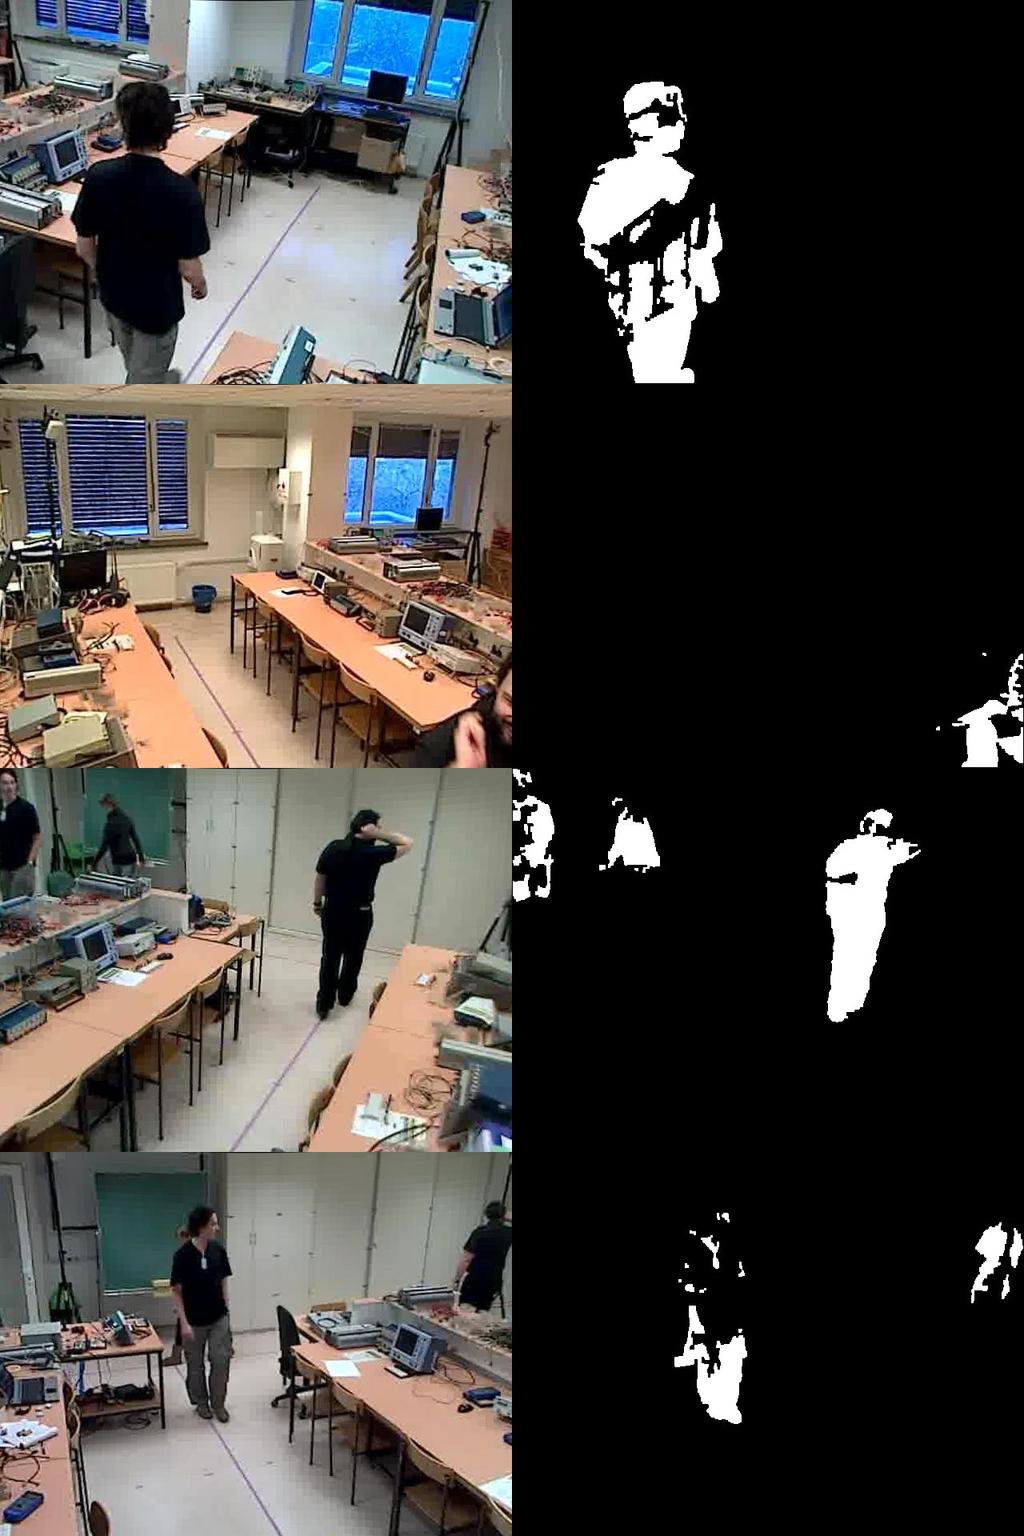 On the left, the video frames and the corresponding background subtraction results are shown.